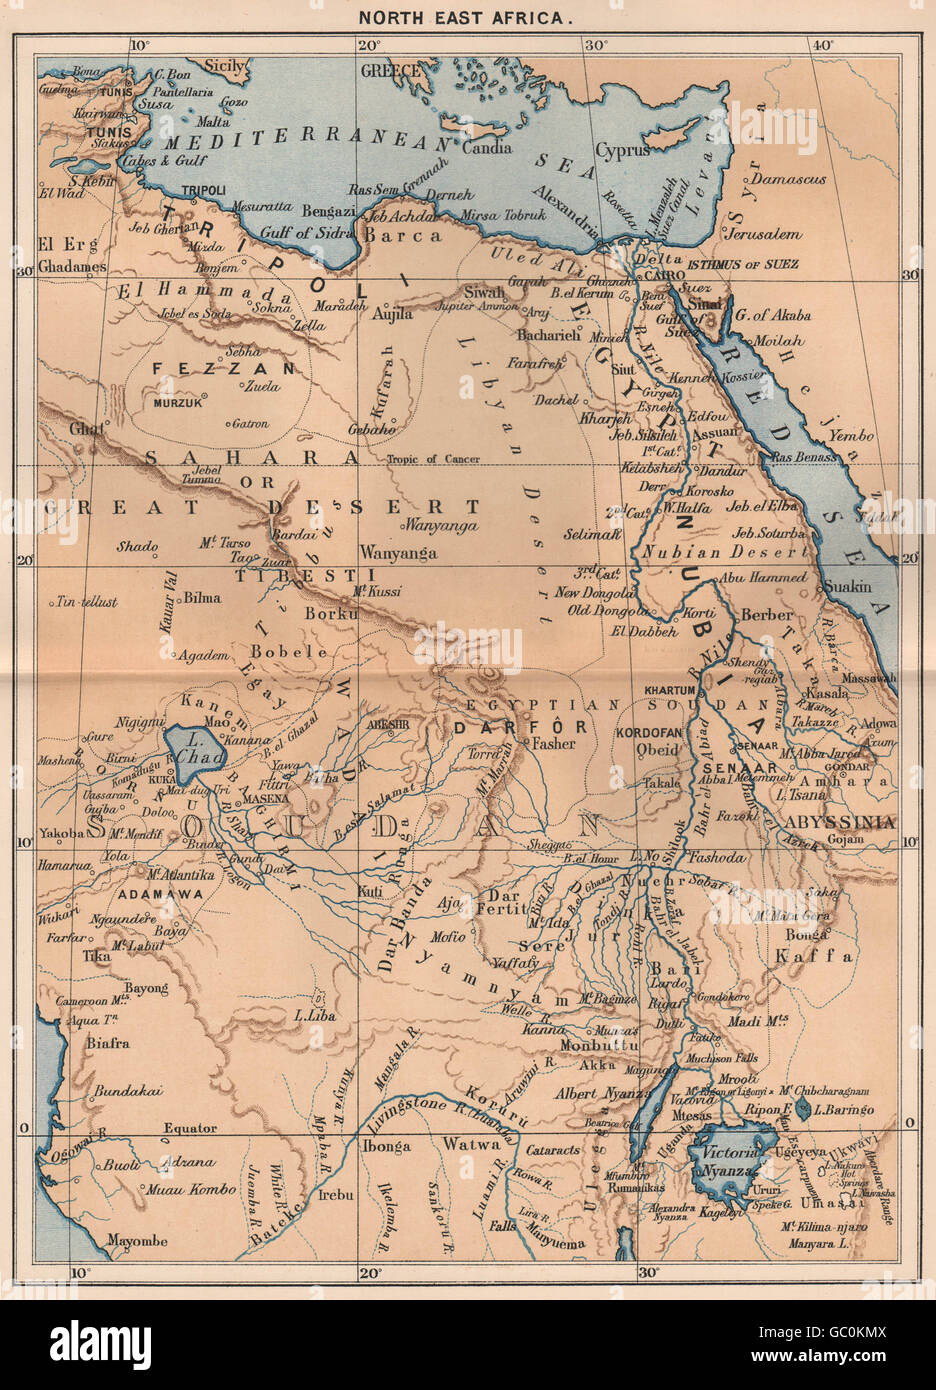 North East Africa, 1885 antique map Stock Photo